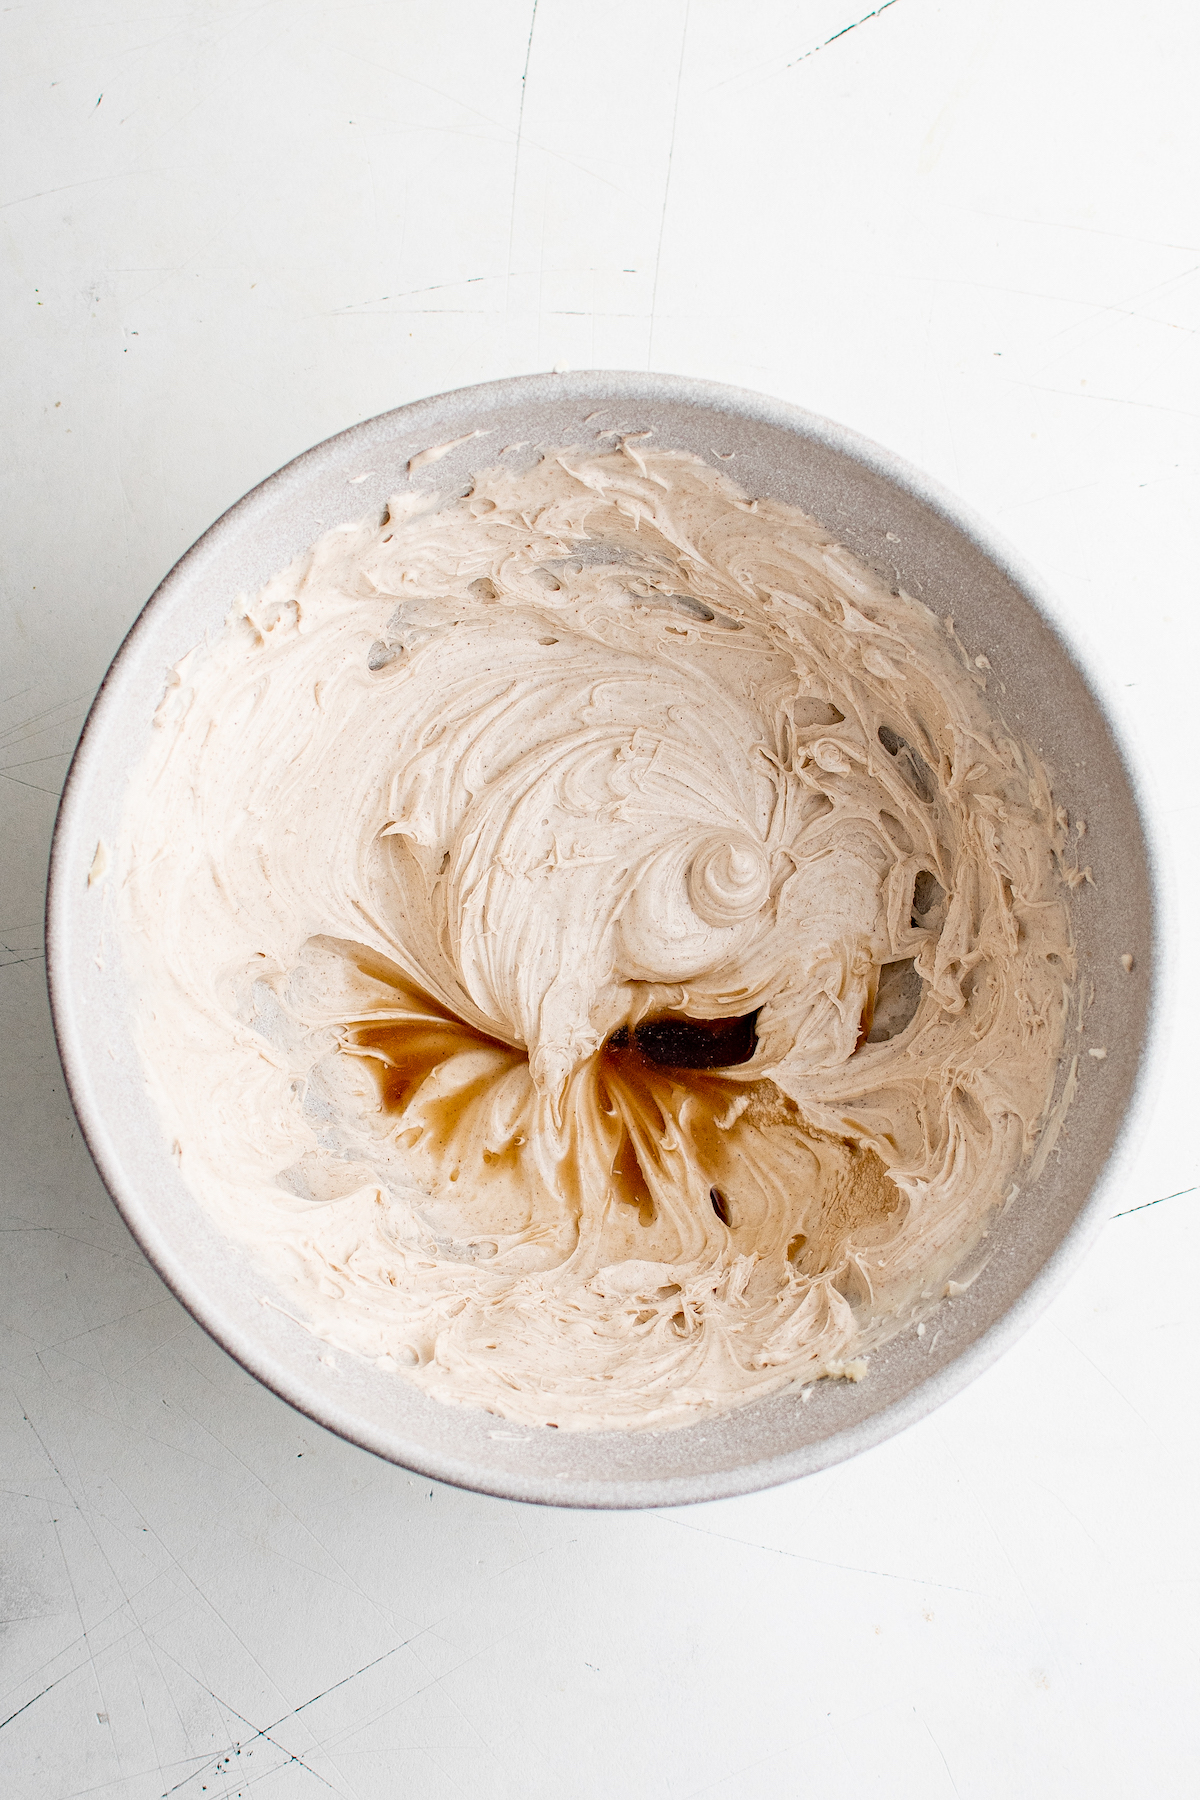 Cream cheese frosting in a mixing bowl, with vanilla extract poured in.